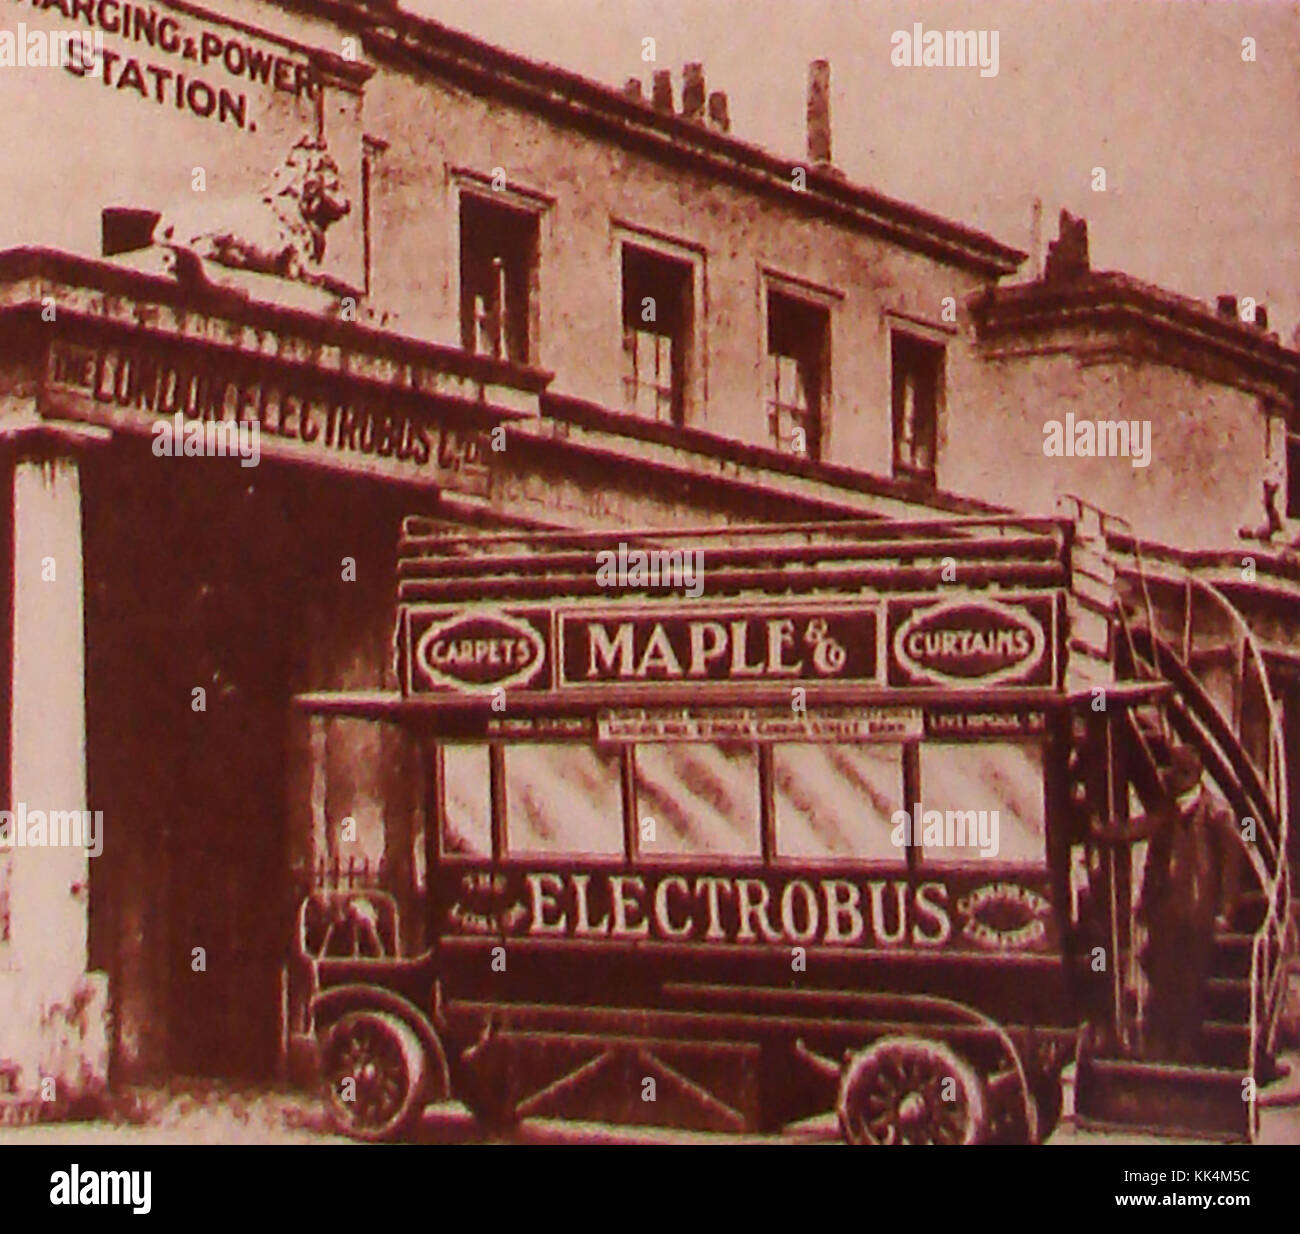 An English battery powered 'Electrobus' from 1906 run by the London Electrobus Company at a 'charging  and power station' Stock Photo